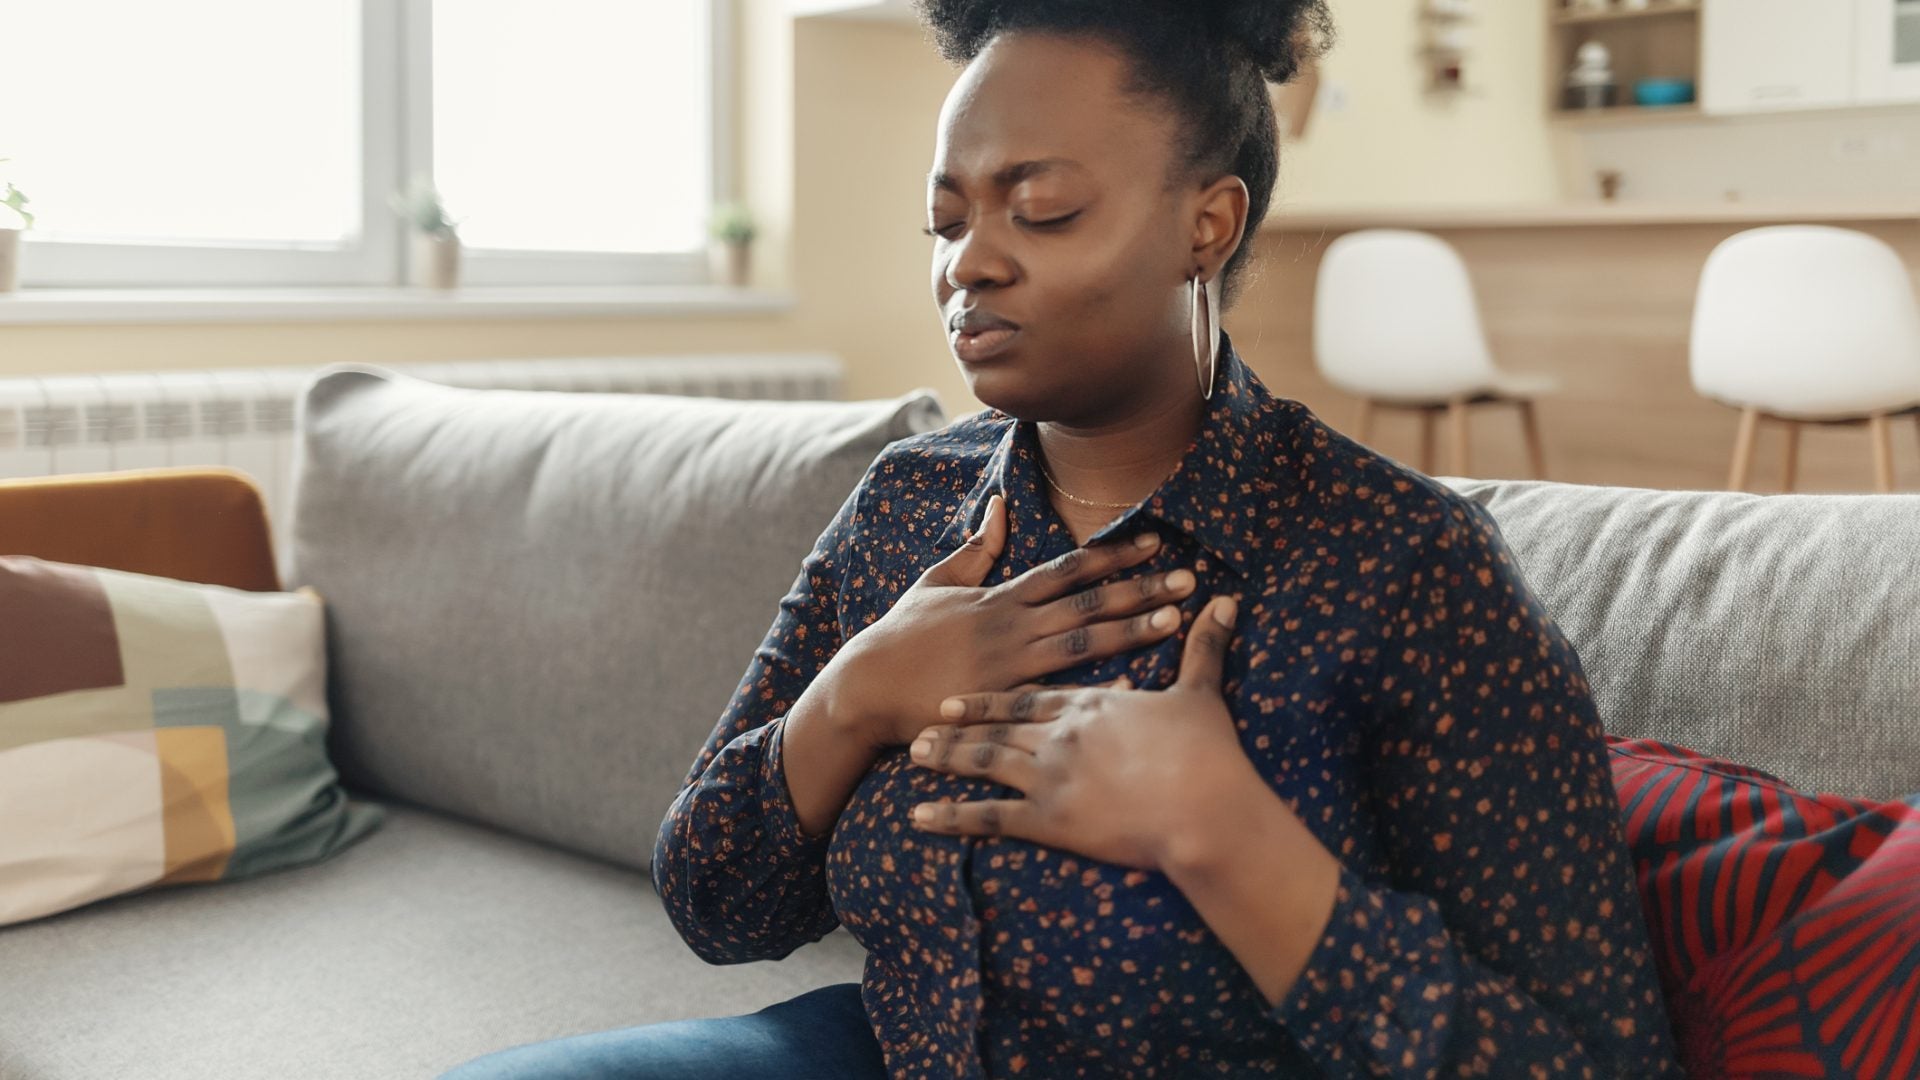 Heartburn Or Heart Disease? The Subtle Warning Signs Of A Sick Heart